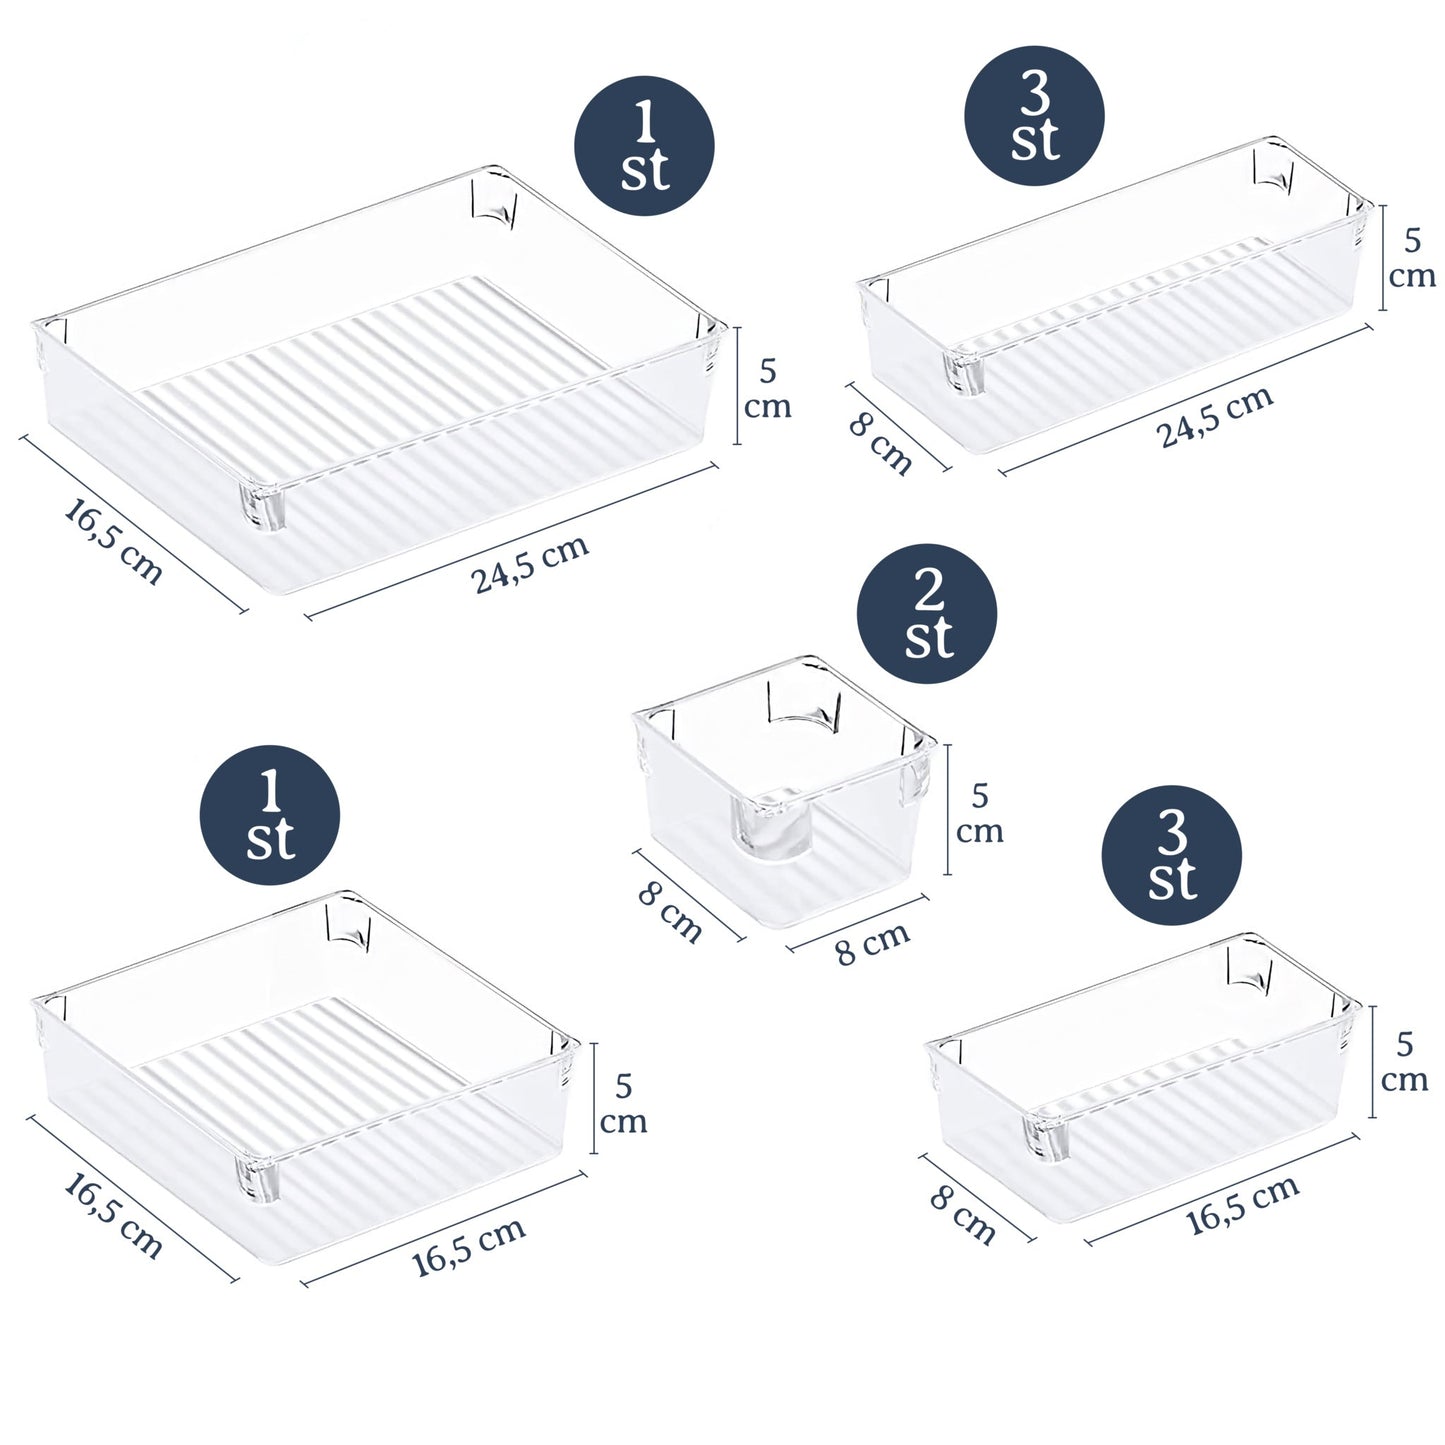 Drawer Organisers (10 pcs) - Household Storage Containers - The Organisy